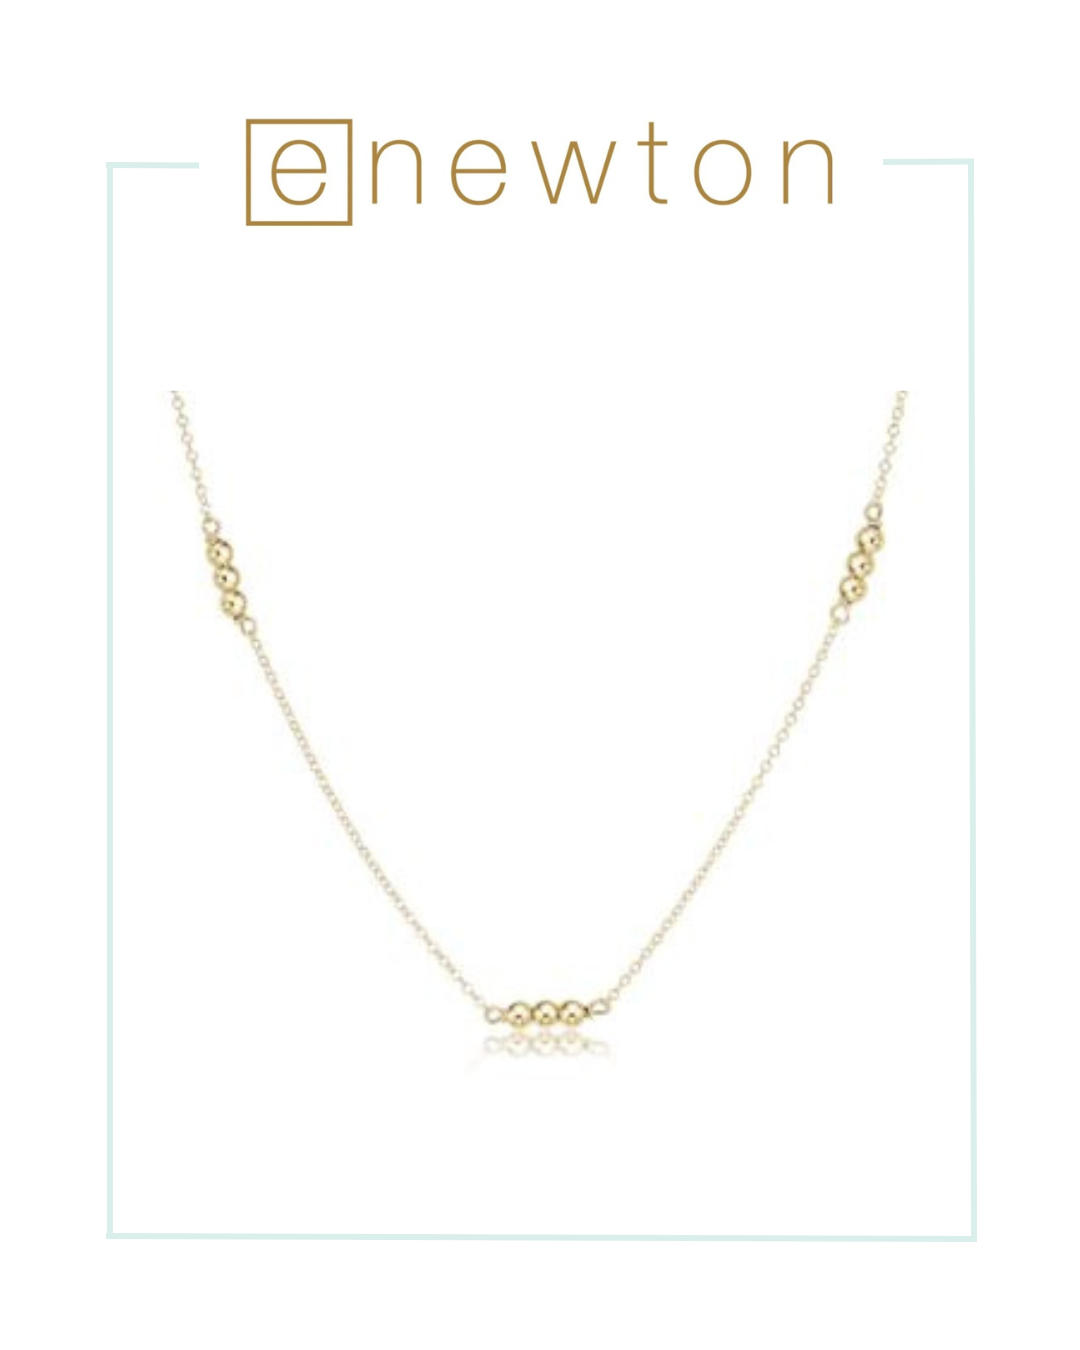 E Newton 15" Choker Joy Simplicity Chain - 3mm Gold-Necklaces-ENEWTON-The Village Shoppe, Women’s Fashion Boutique, Shop Online and In Store - Located in Muscle Shoals, AL.